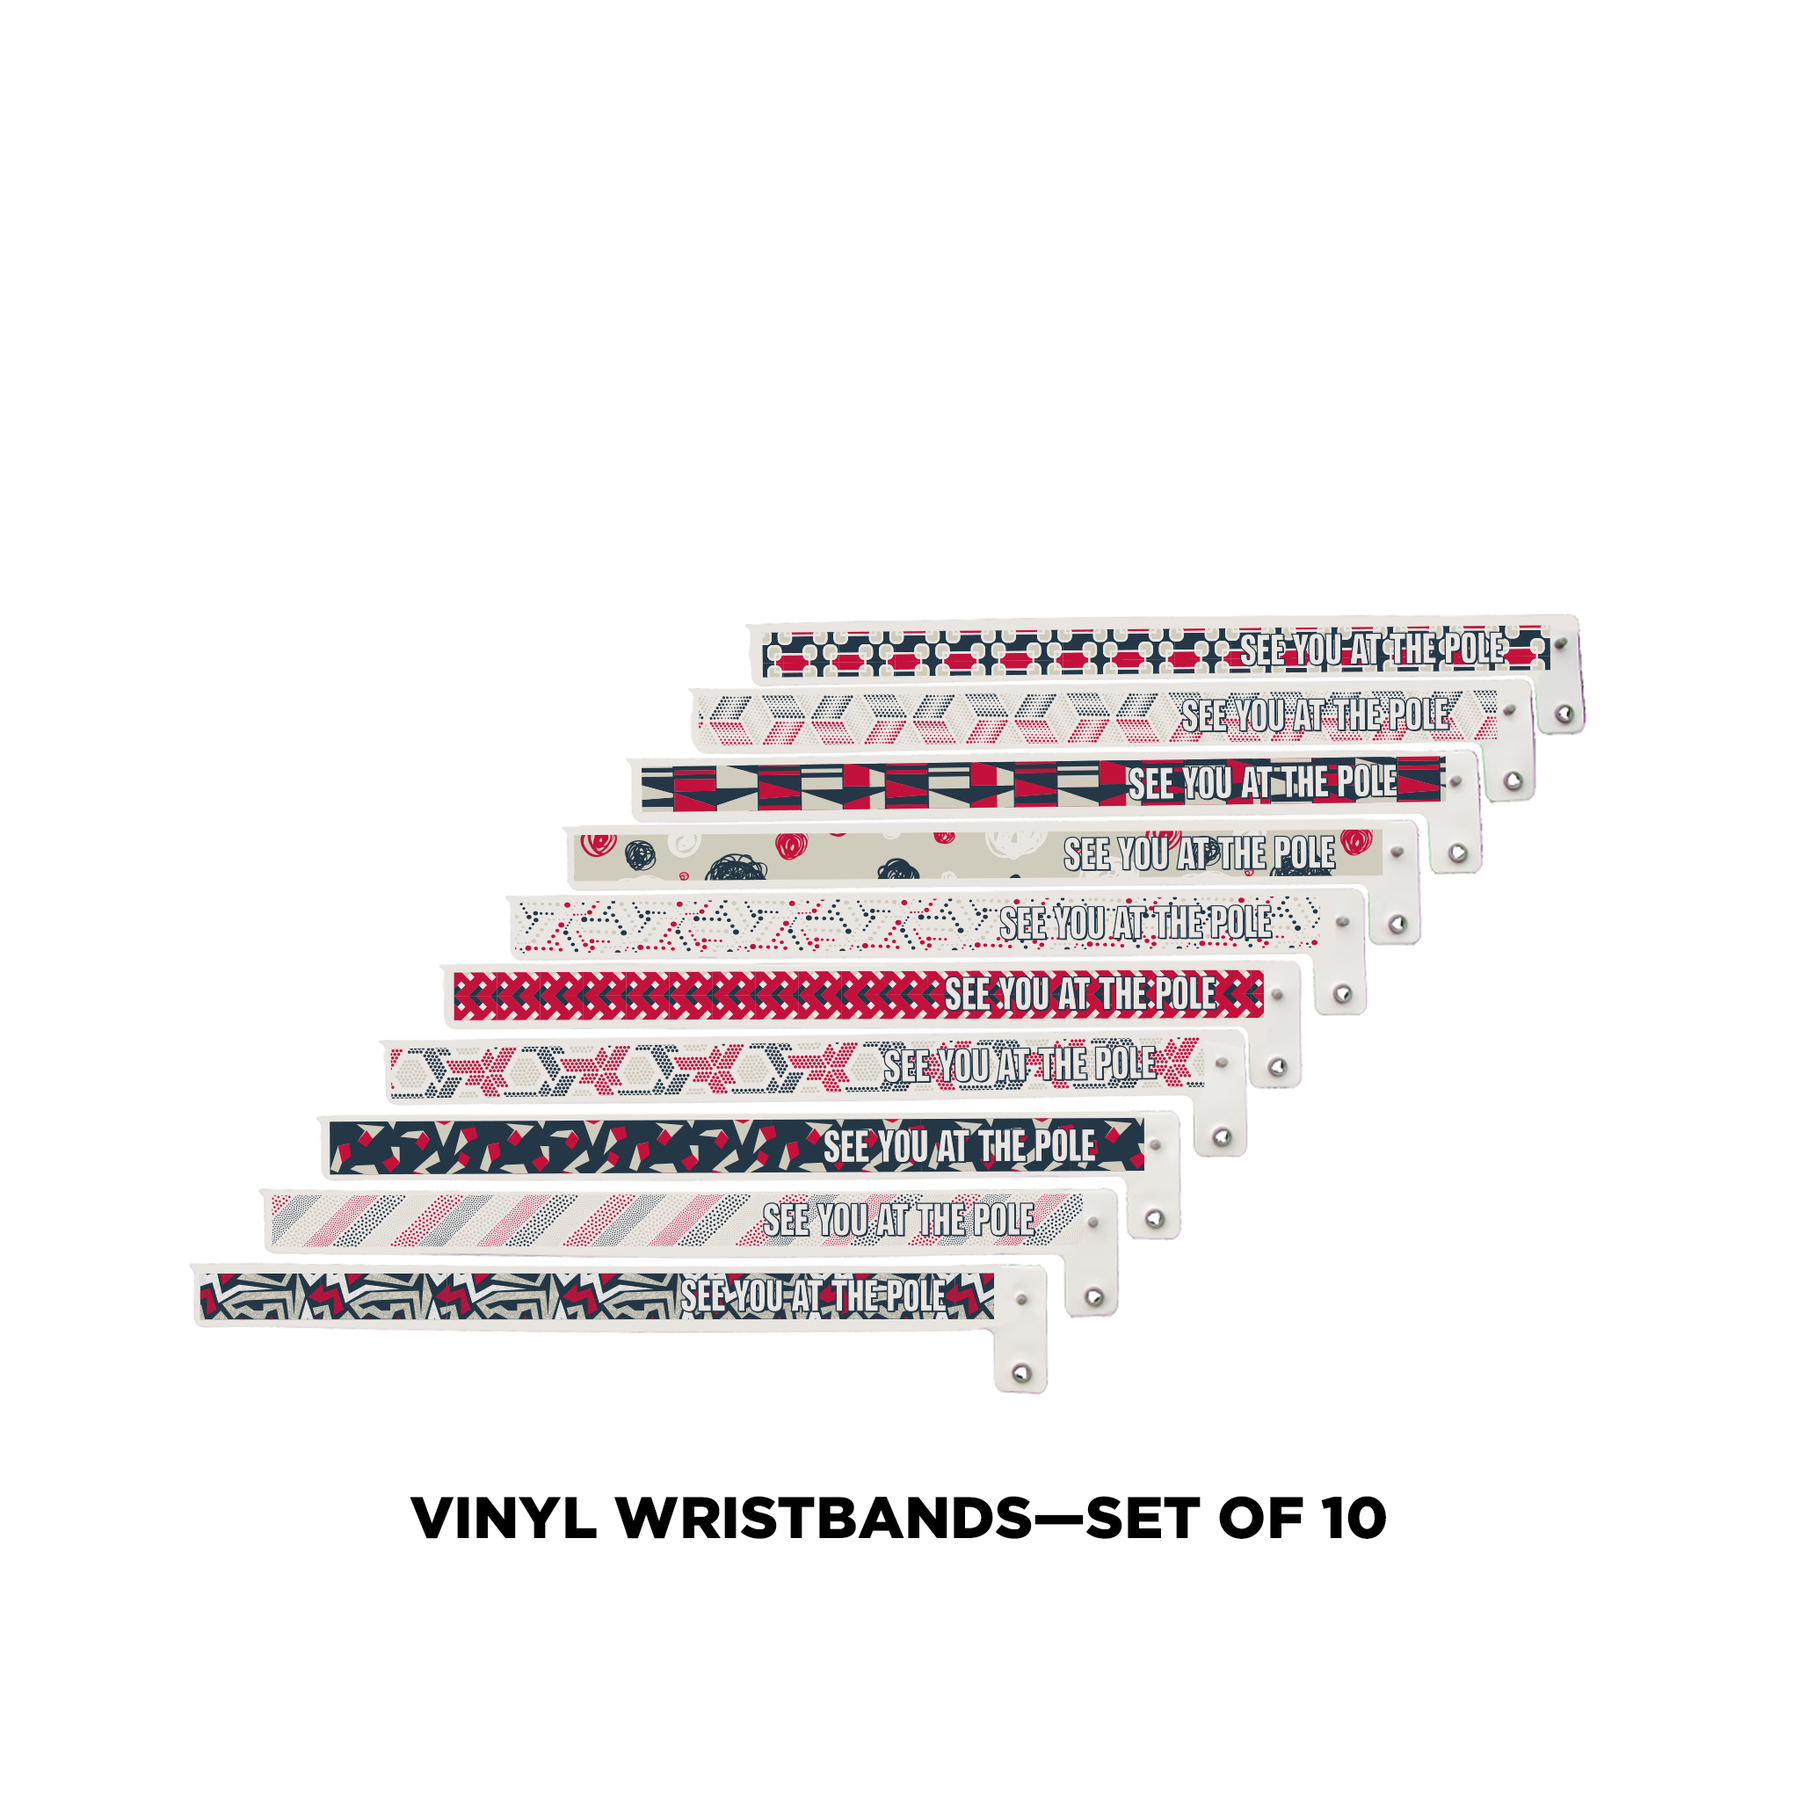 Vinyl Wristband (set of 10)—Red, Blue and Gray